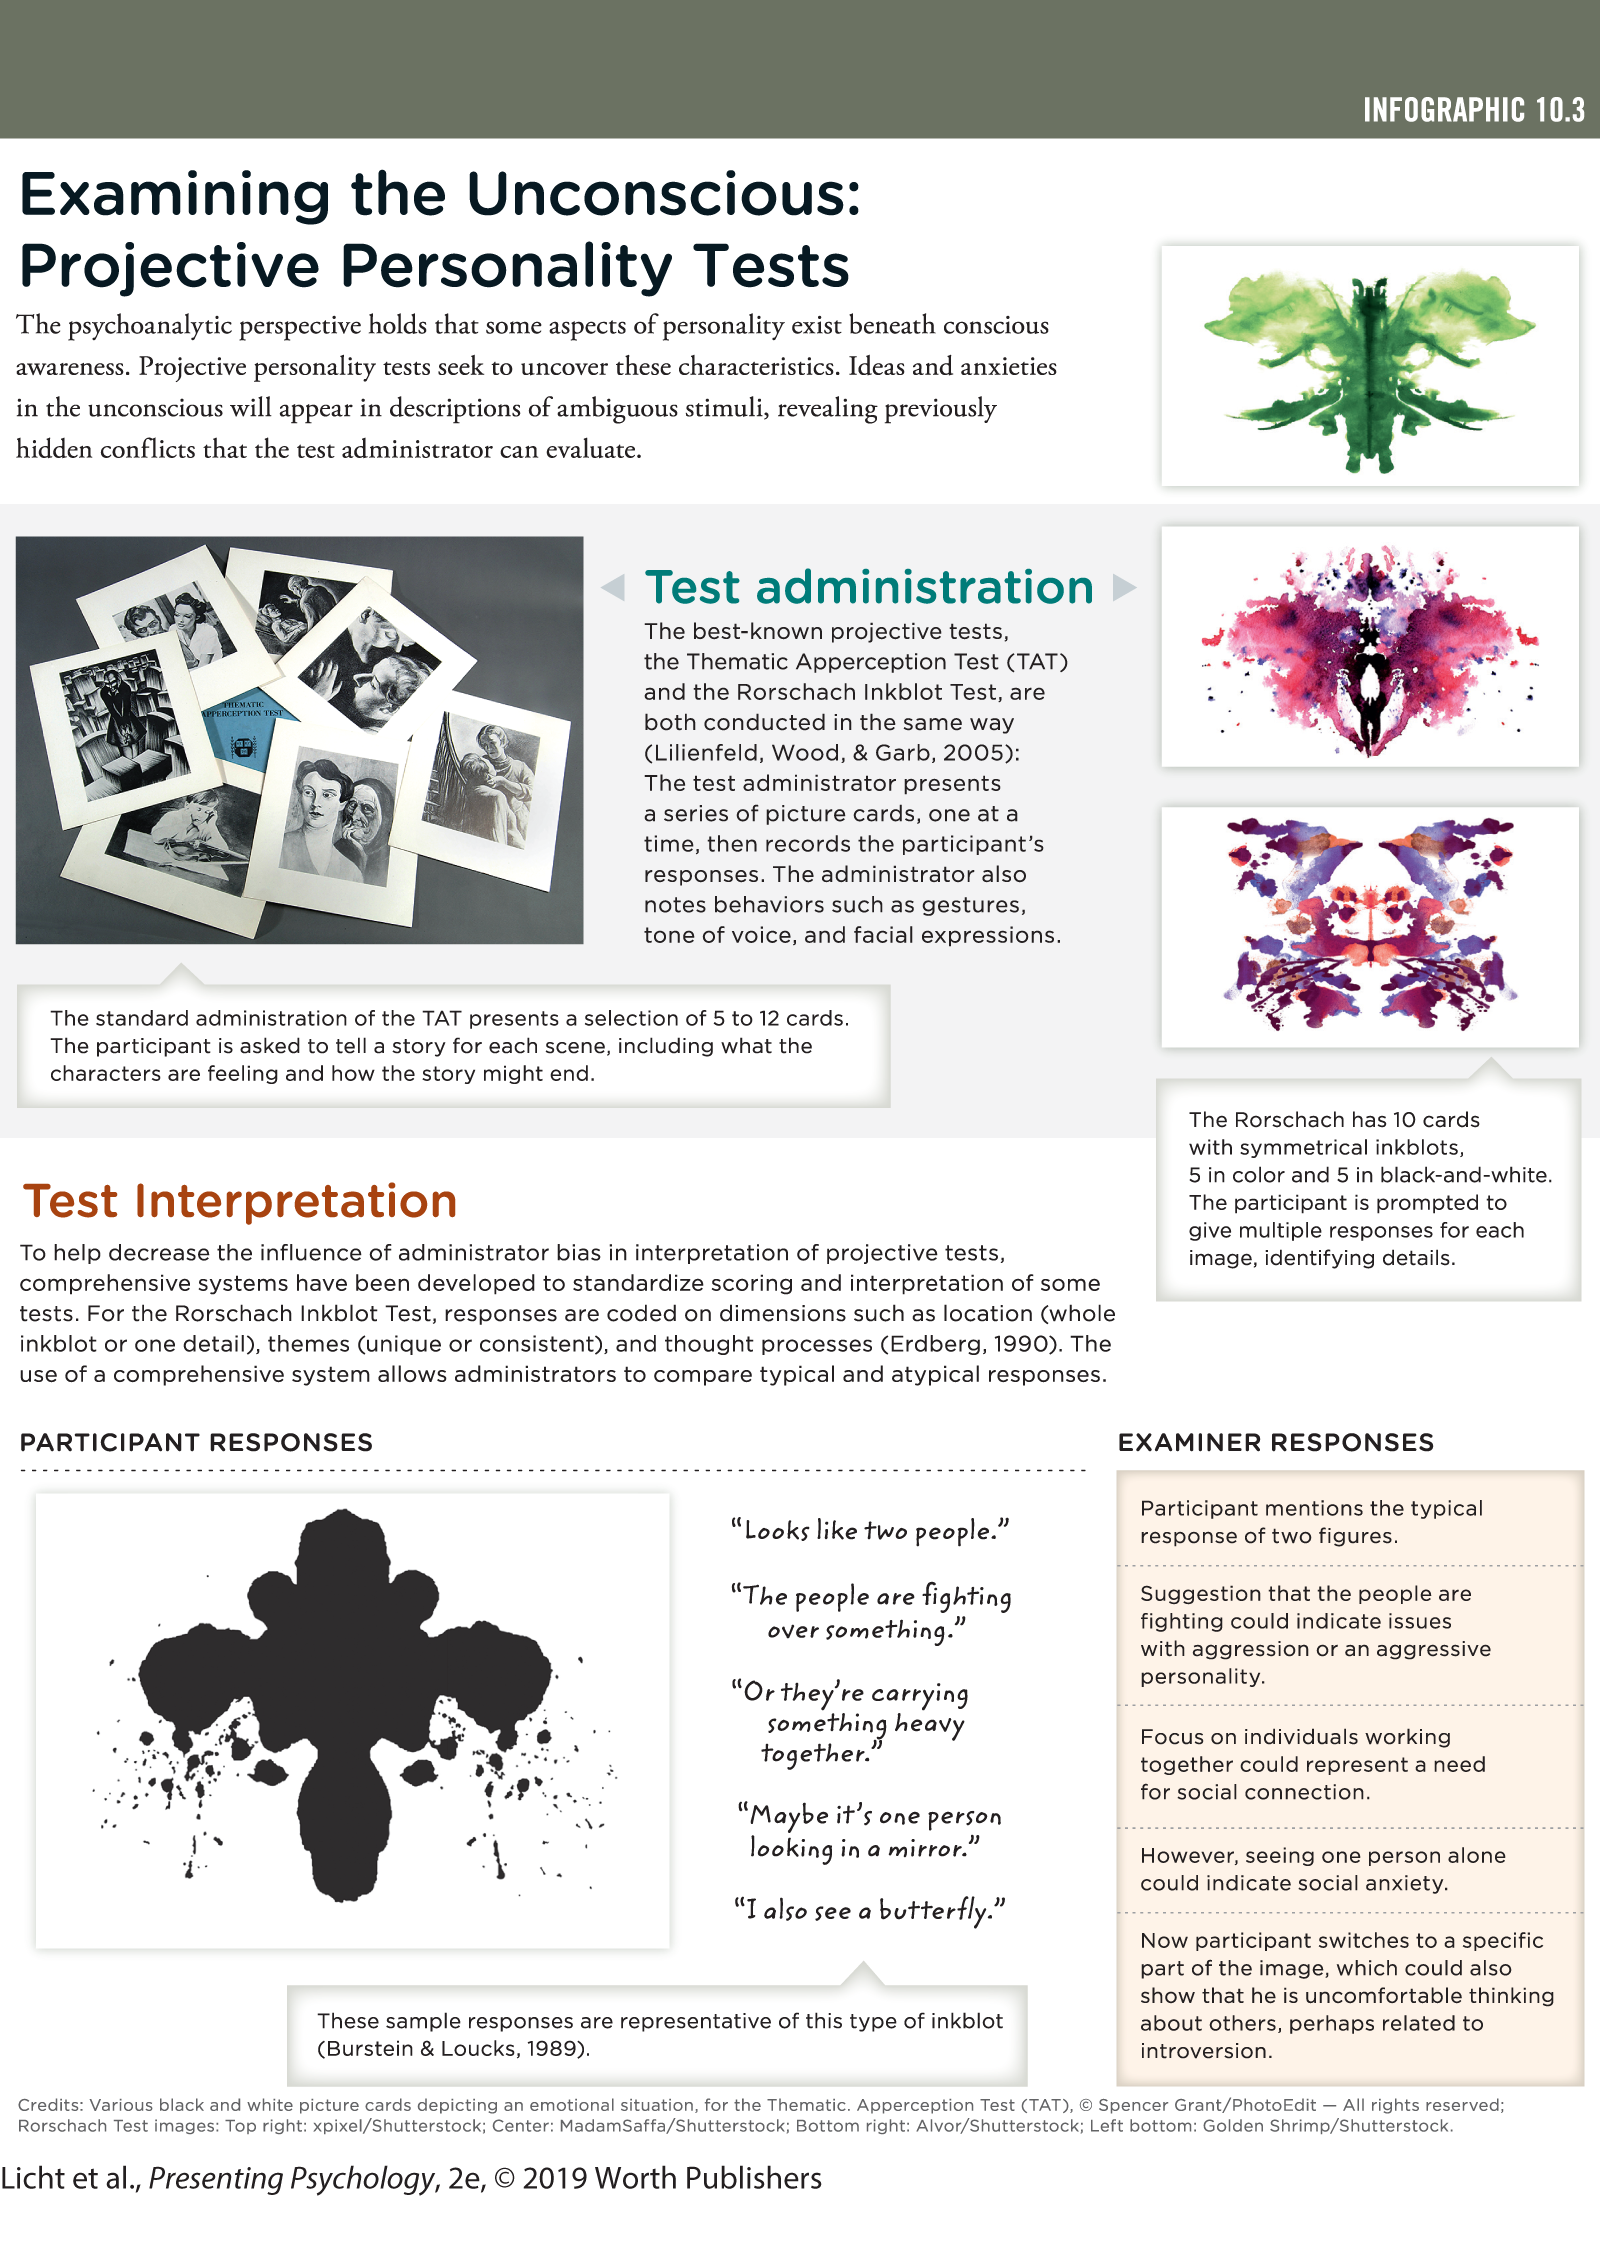 An infographic analyses the unconcious personality tests and its impliations. You can read full description from the link below